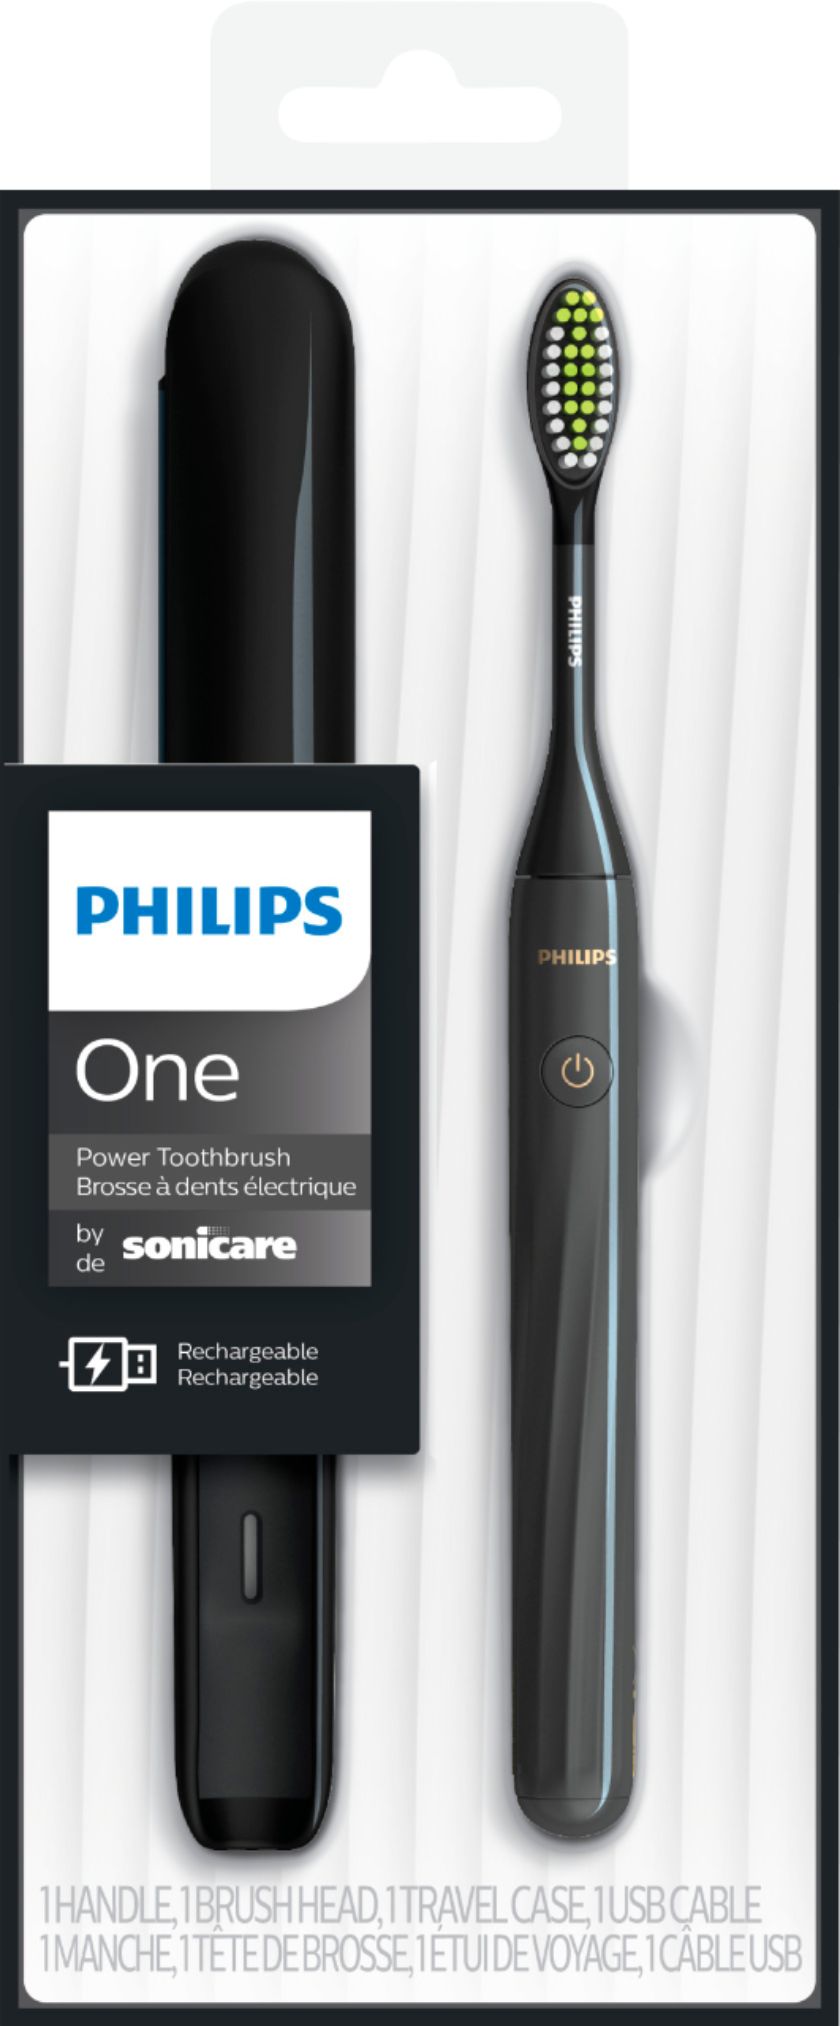 Philips Sonicare - Philips One by Sonicare Rechargeable Toothbrush - Shadow